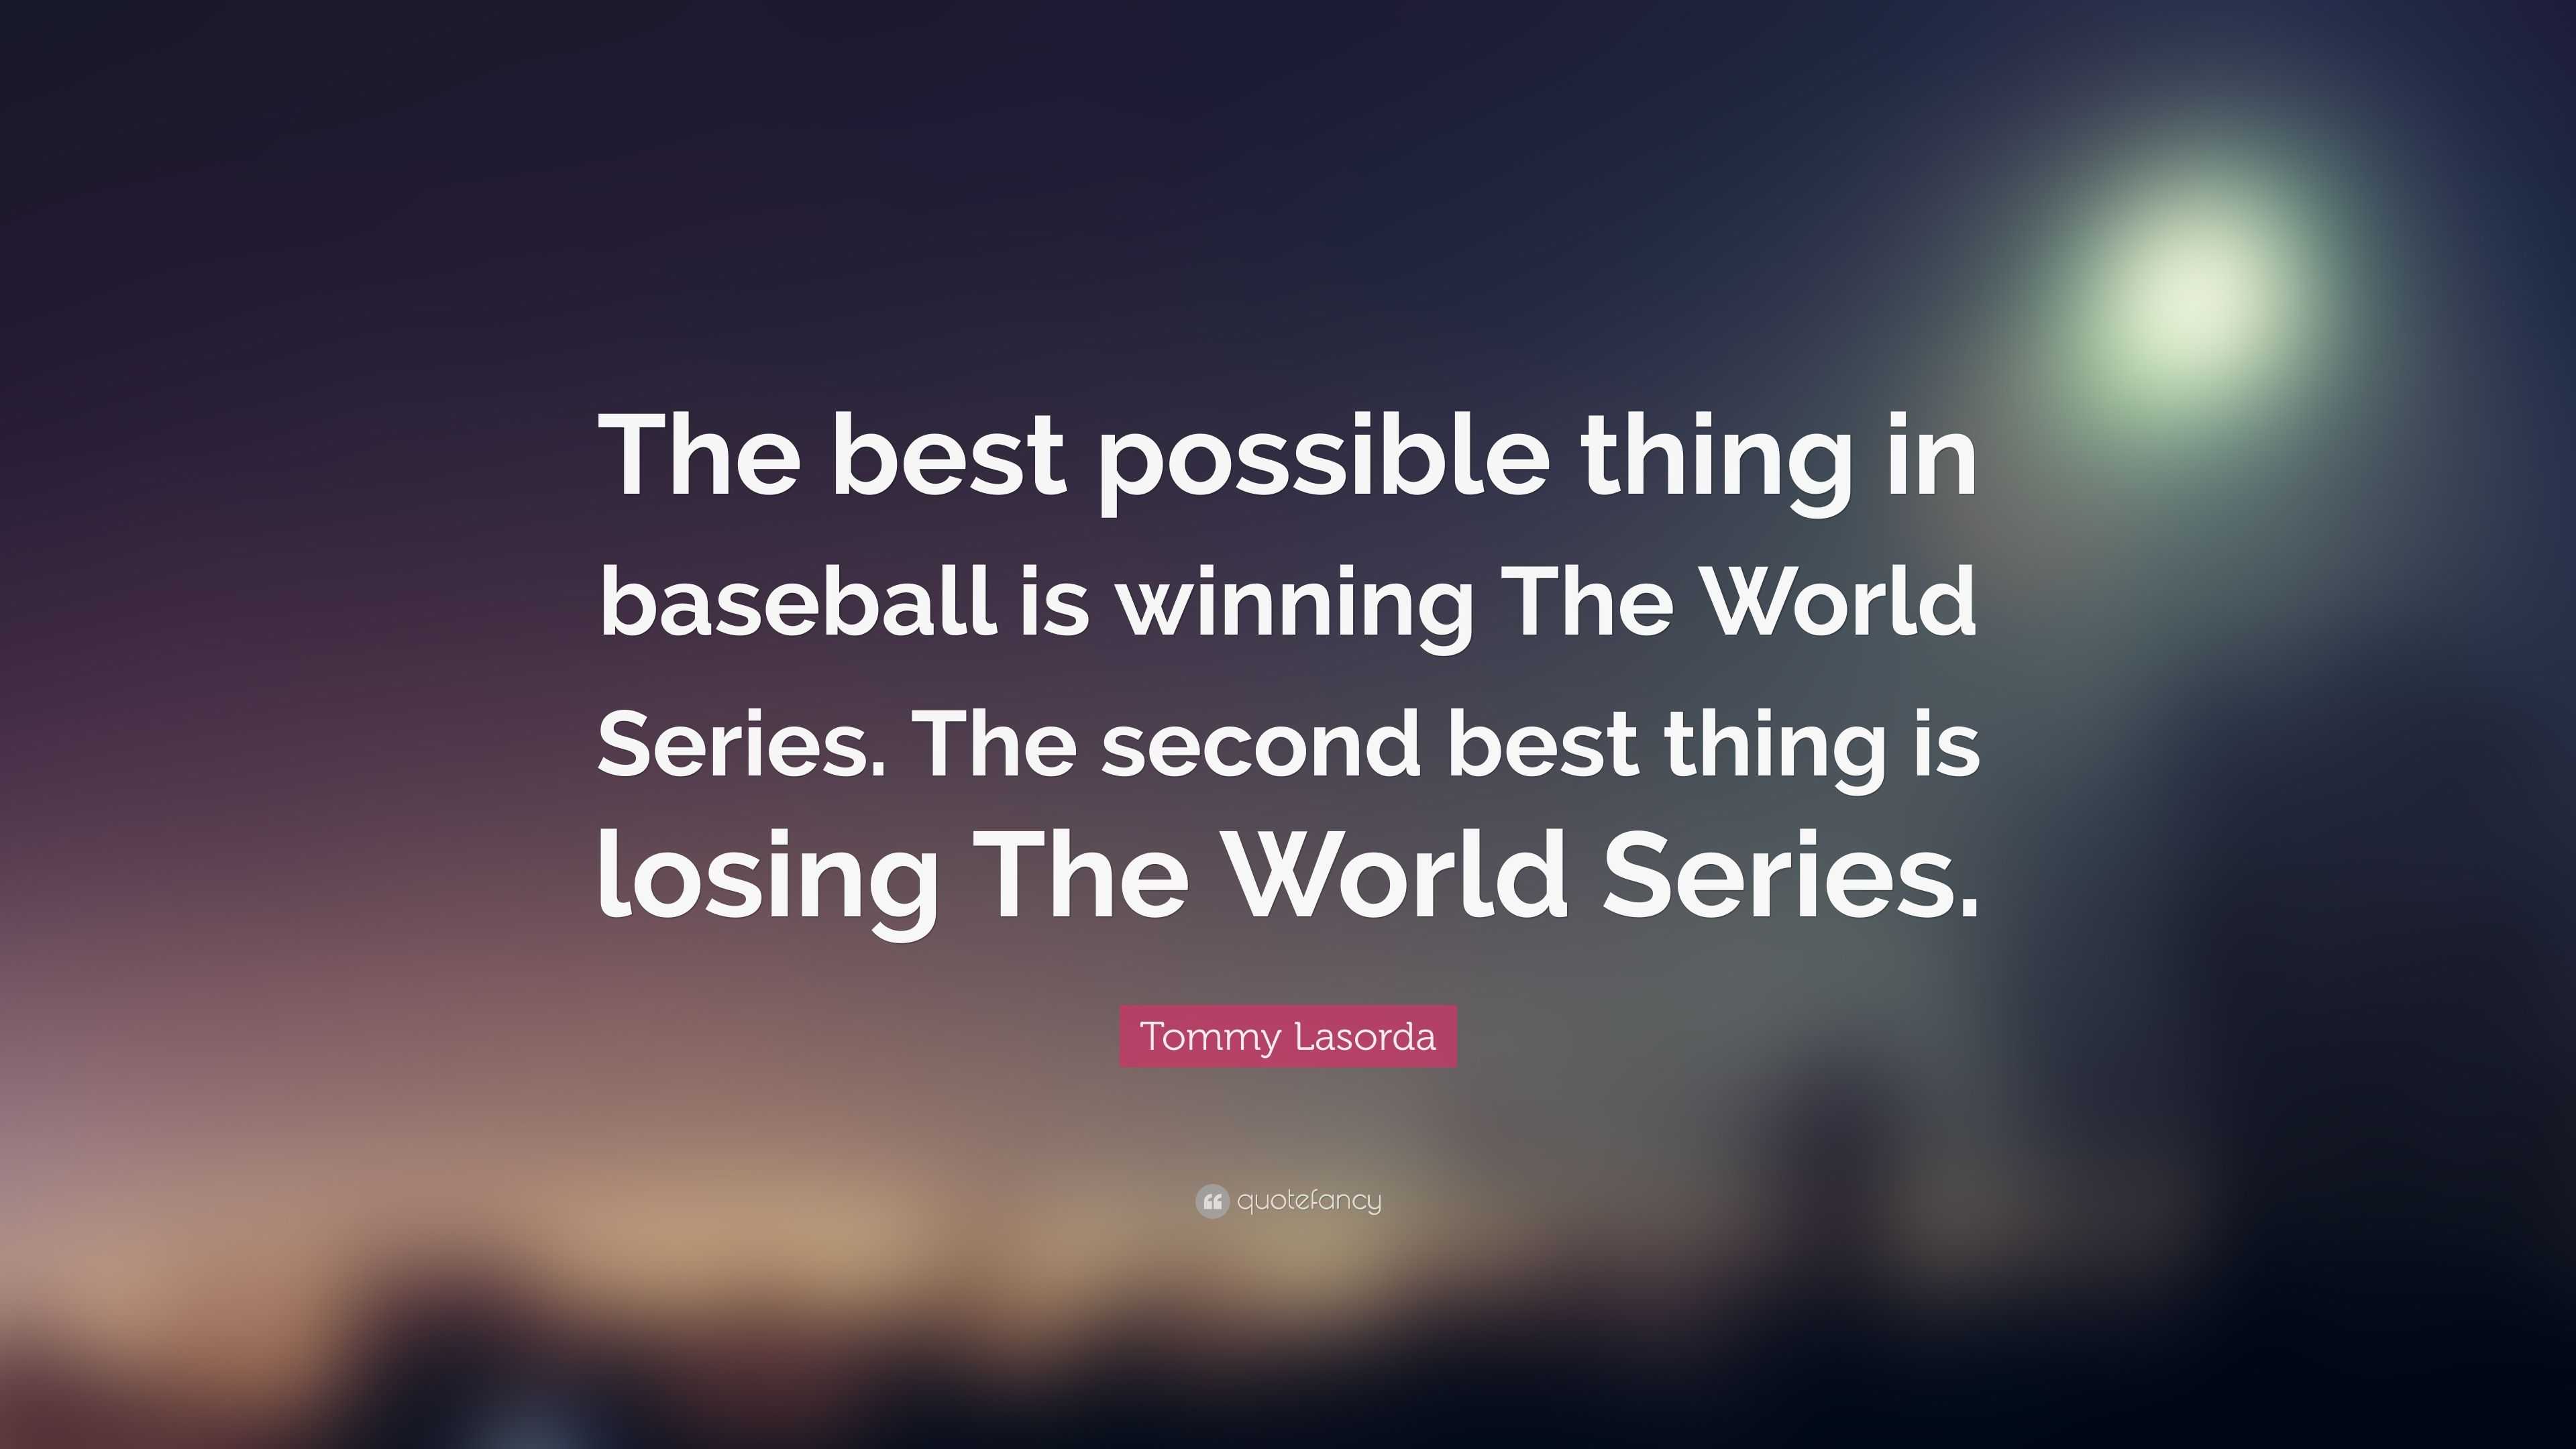  Quotes of the Day: World Series Edition